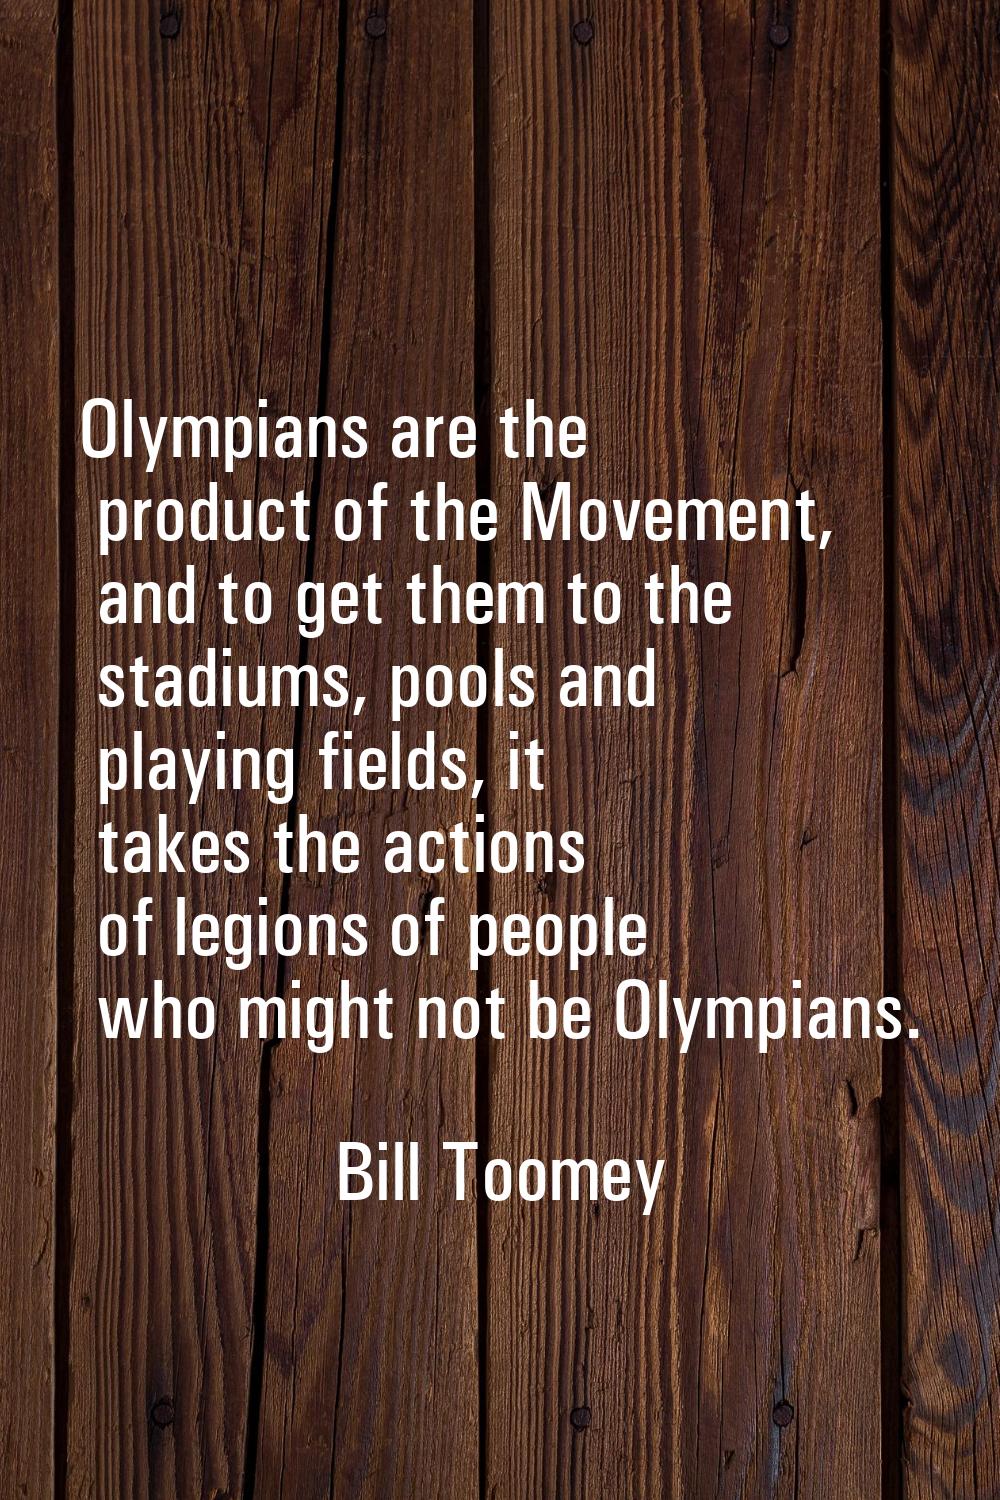 Olympians are the product of the Movement, and to get them to the stadiums, pools and playing field